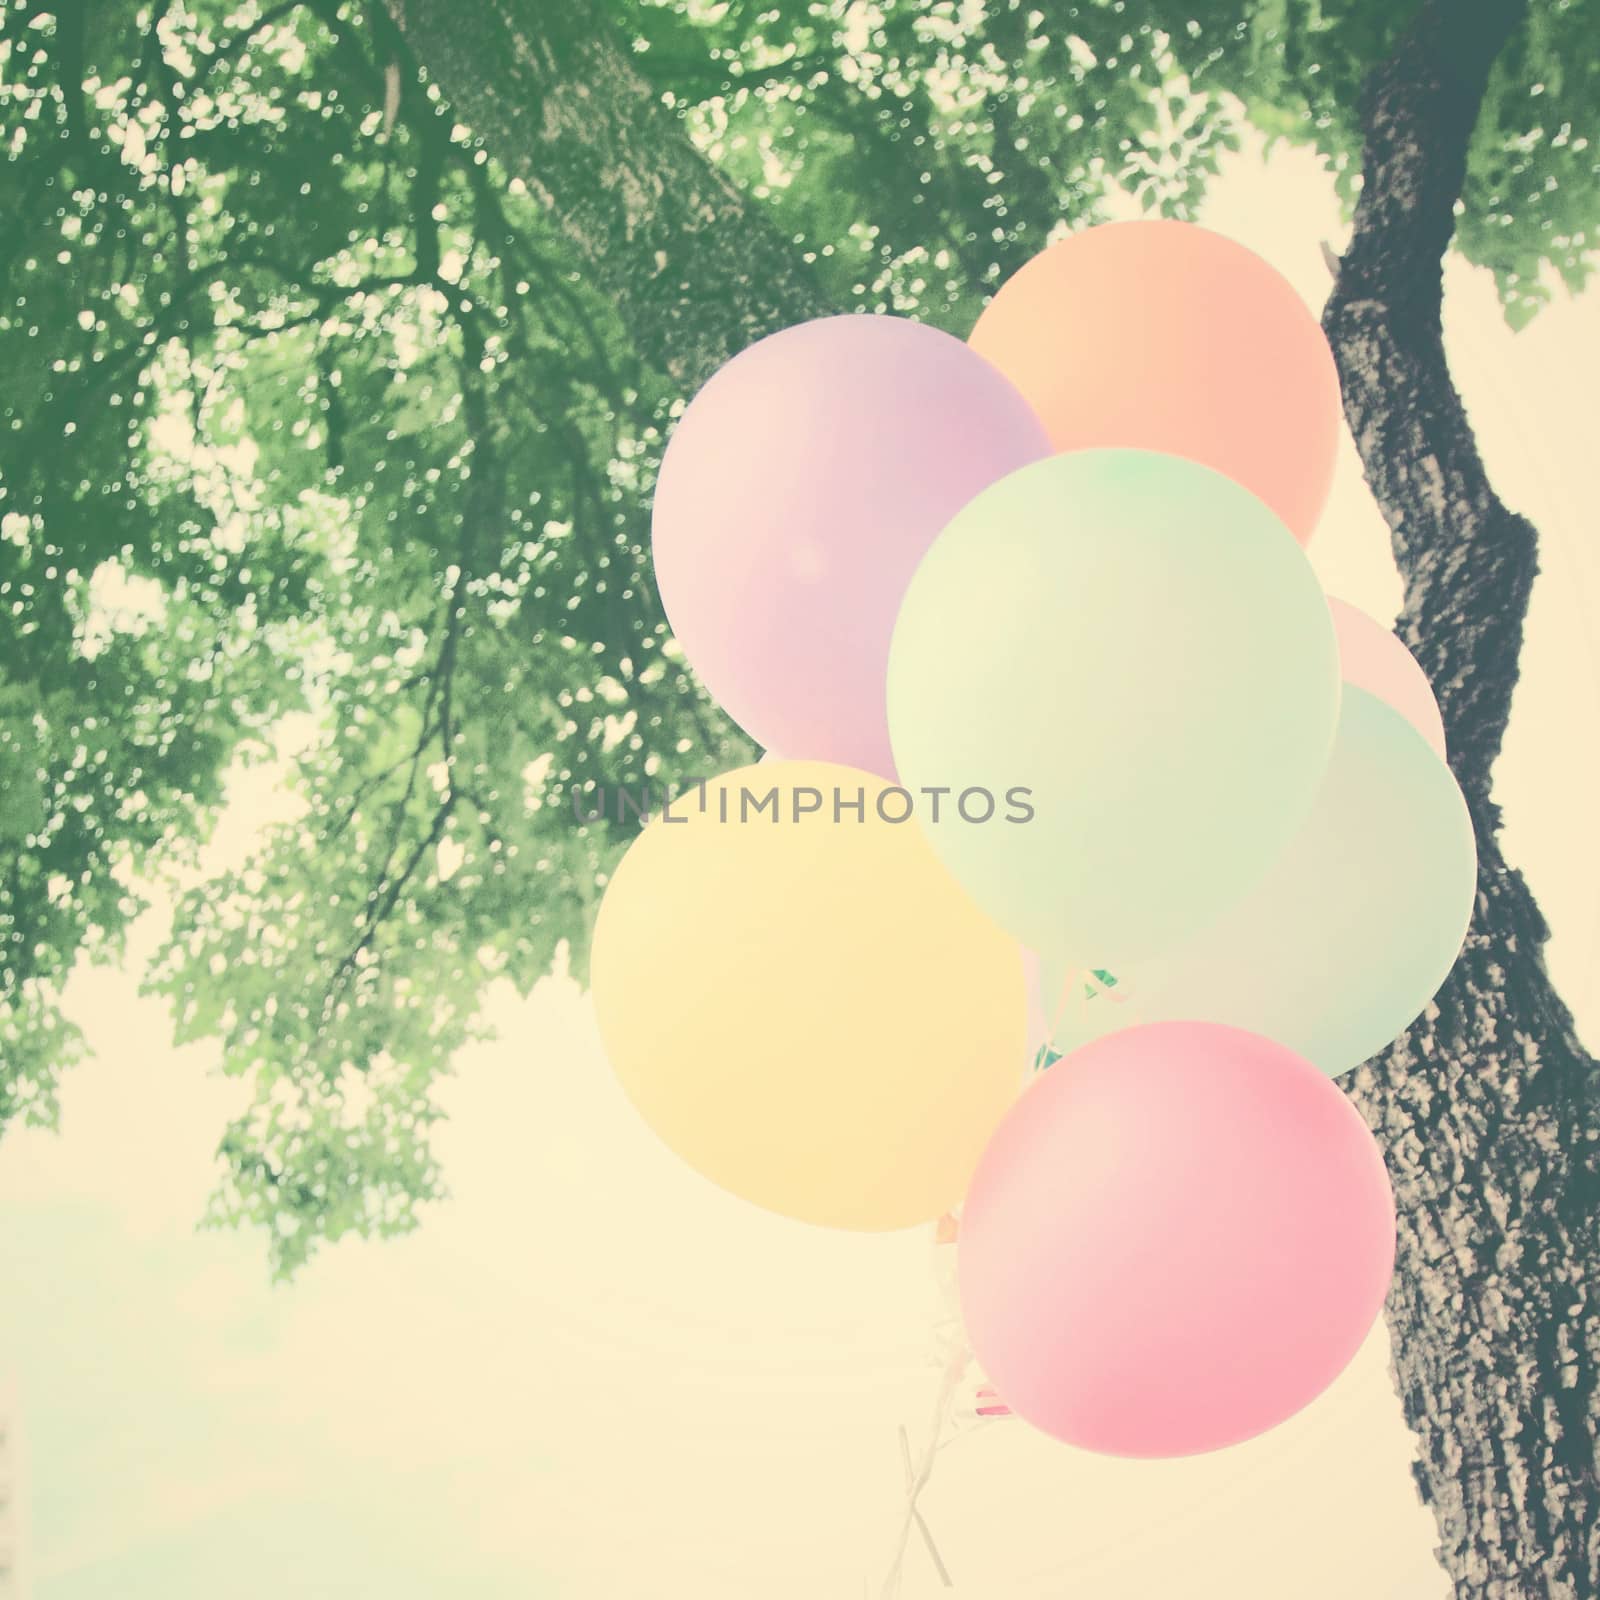 Colorful festive balloons on tree with retro filter effect  by nuchylee